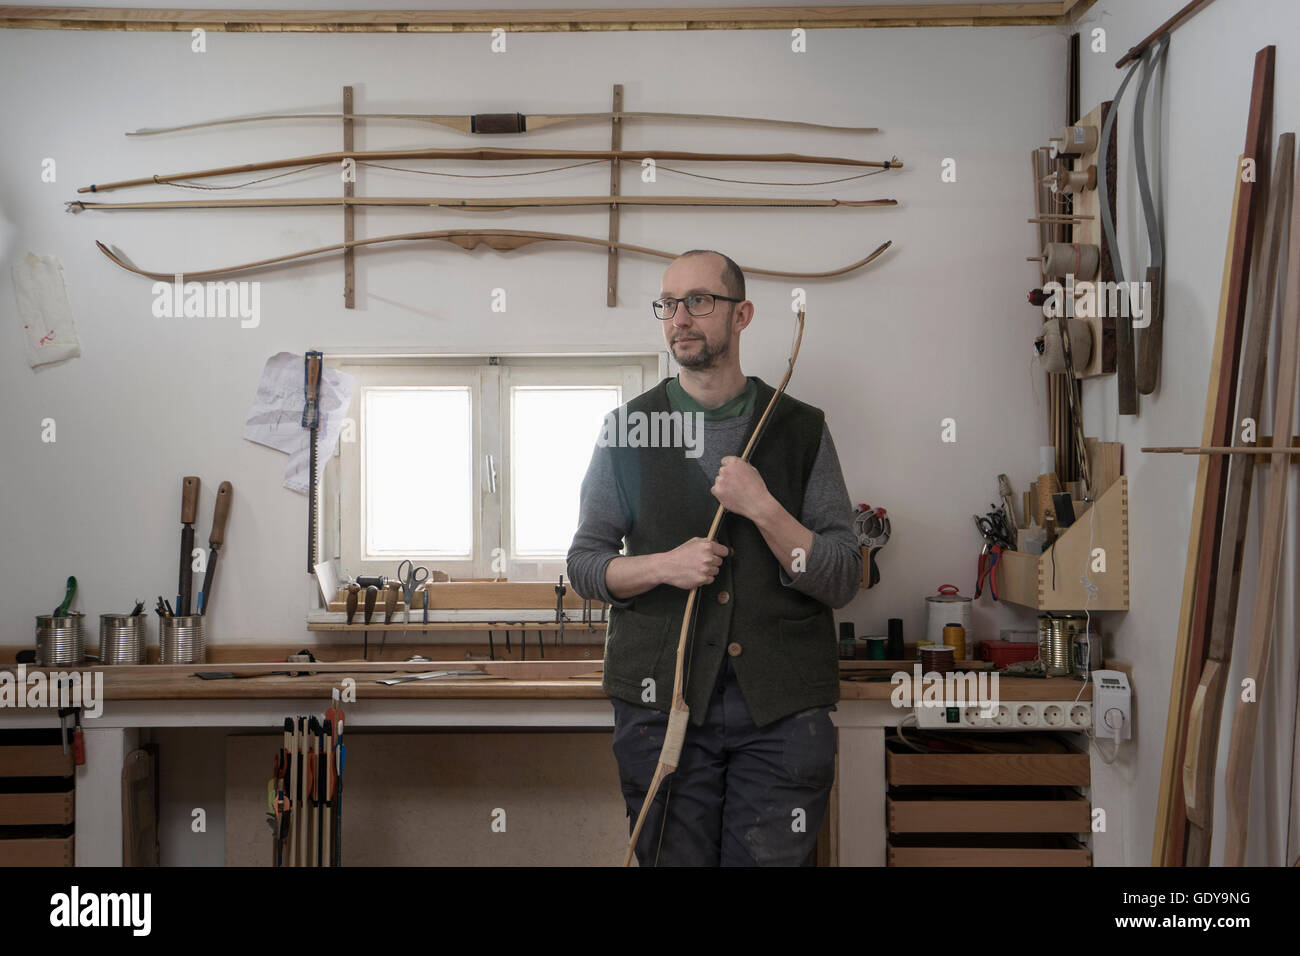 Male bow maker holding bow and thinking in workshop, Bavaria, Germany Stock Photo